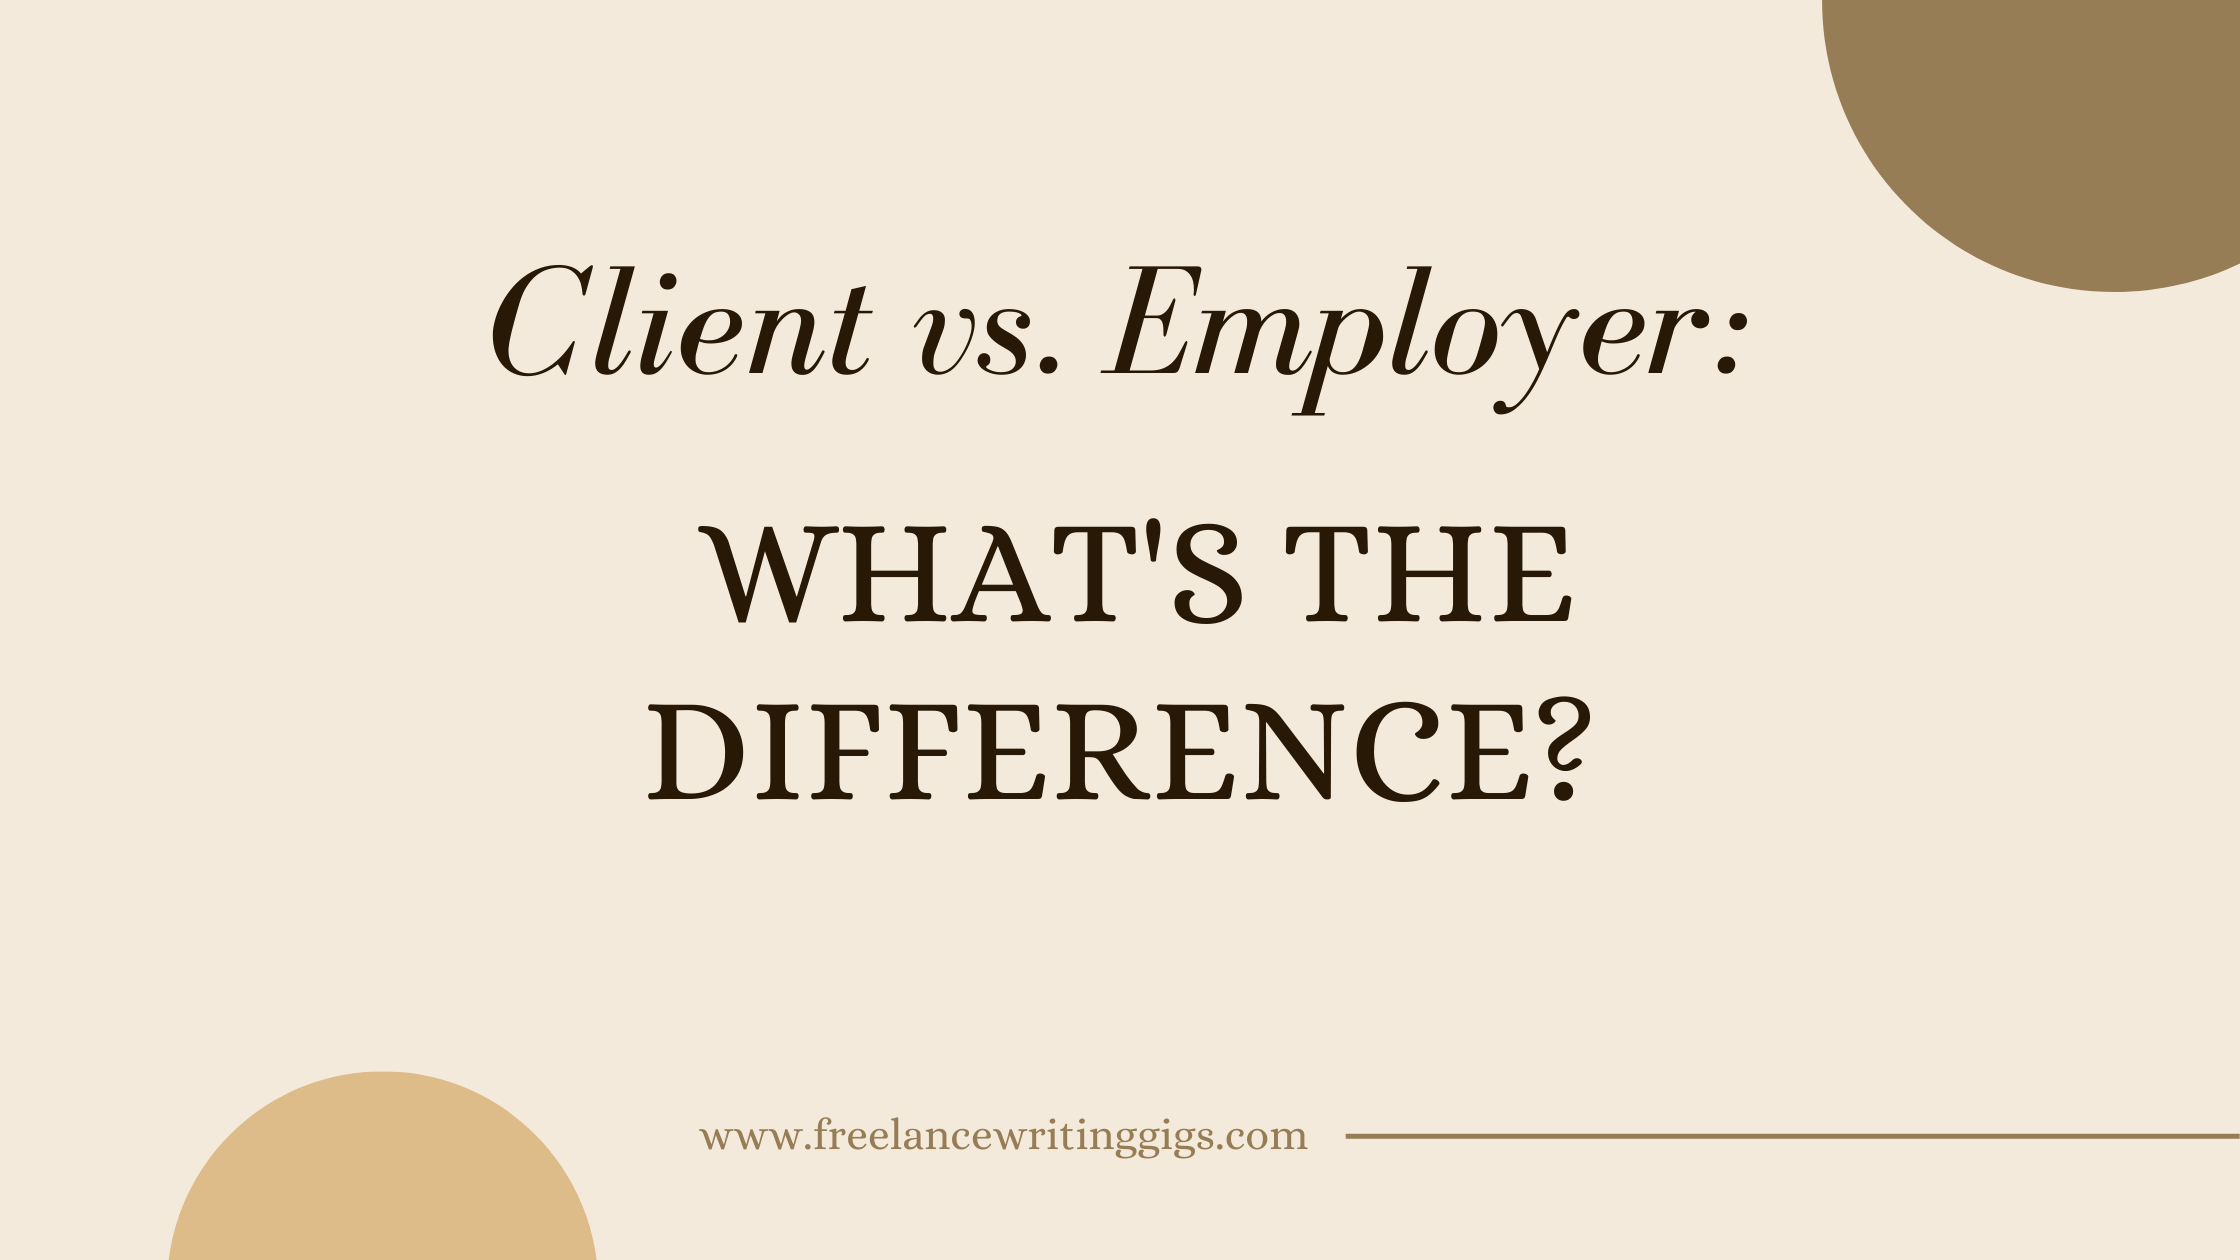 Client vs. Employer: What’s the Difference?